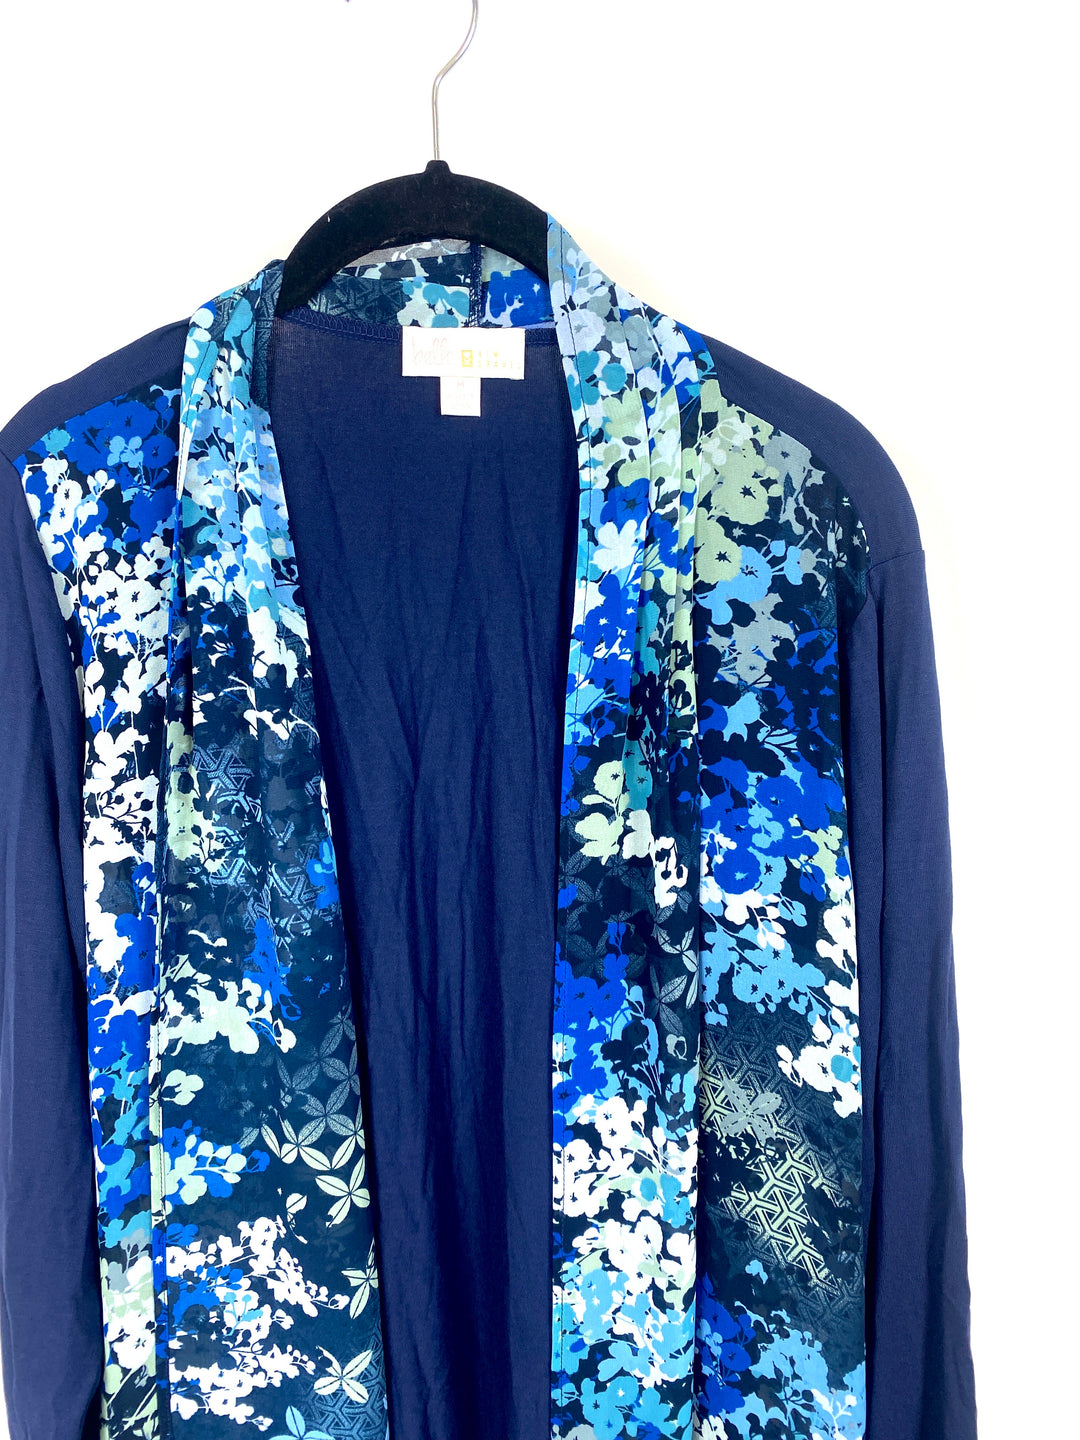 Navy Blue Cardigan with Sheer Blue Accents - Medium/ Large